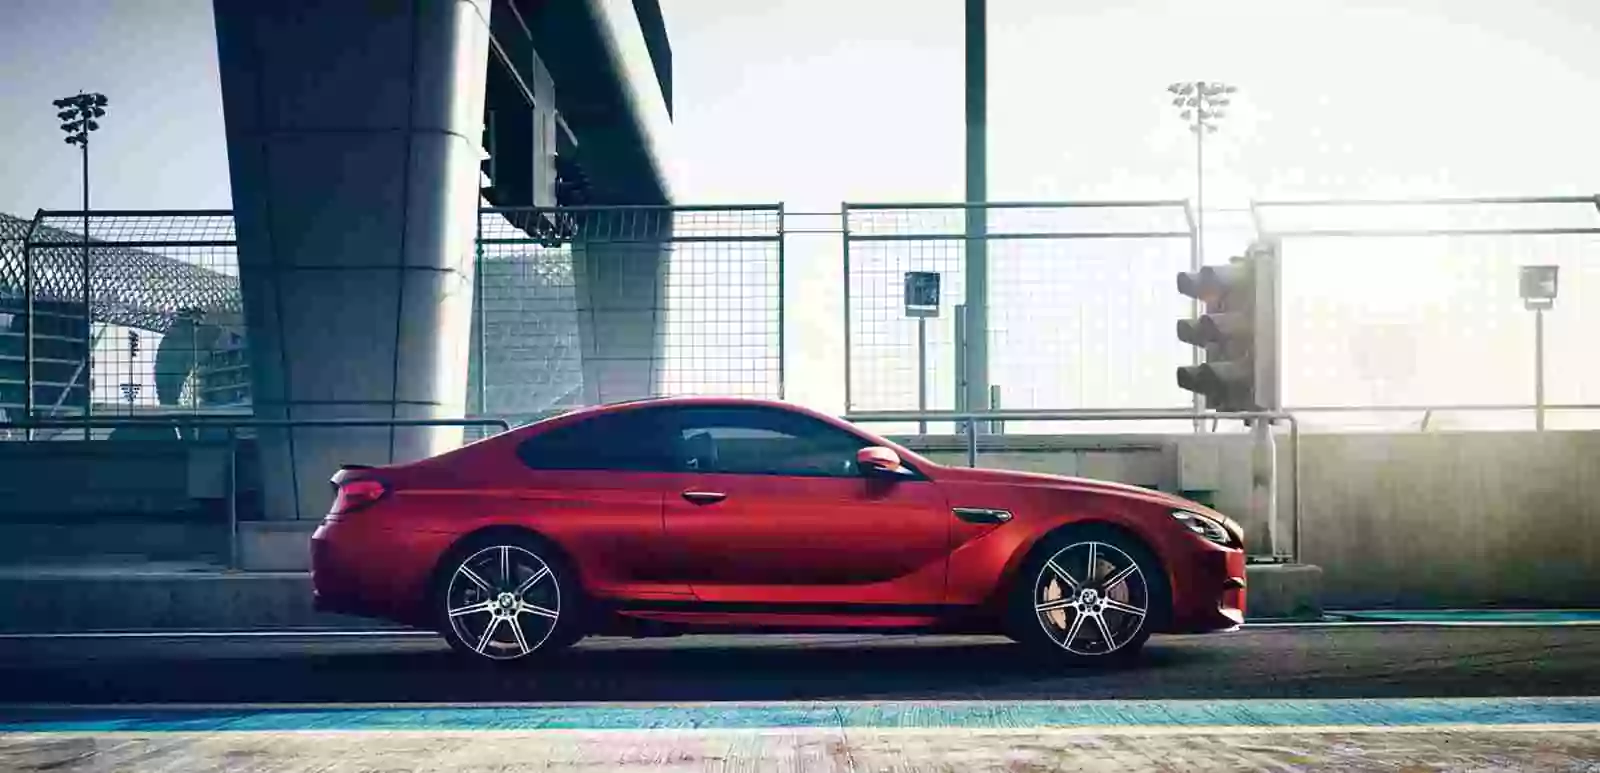 How Much It Cost To Rent BMW M6 In Dubai 